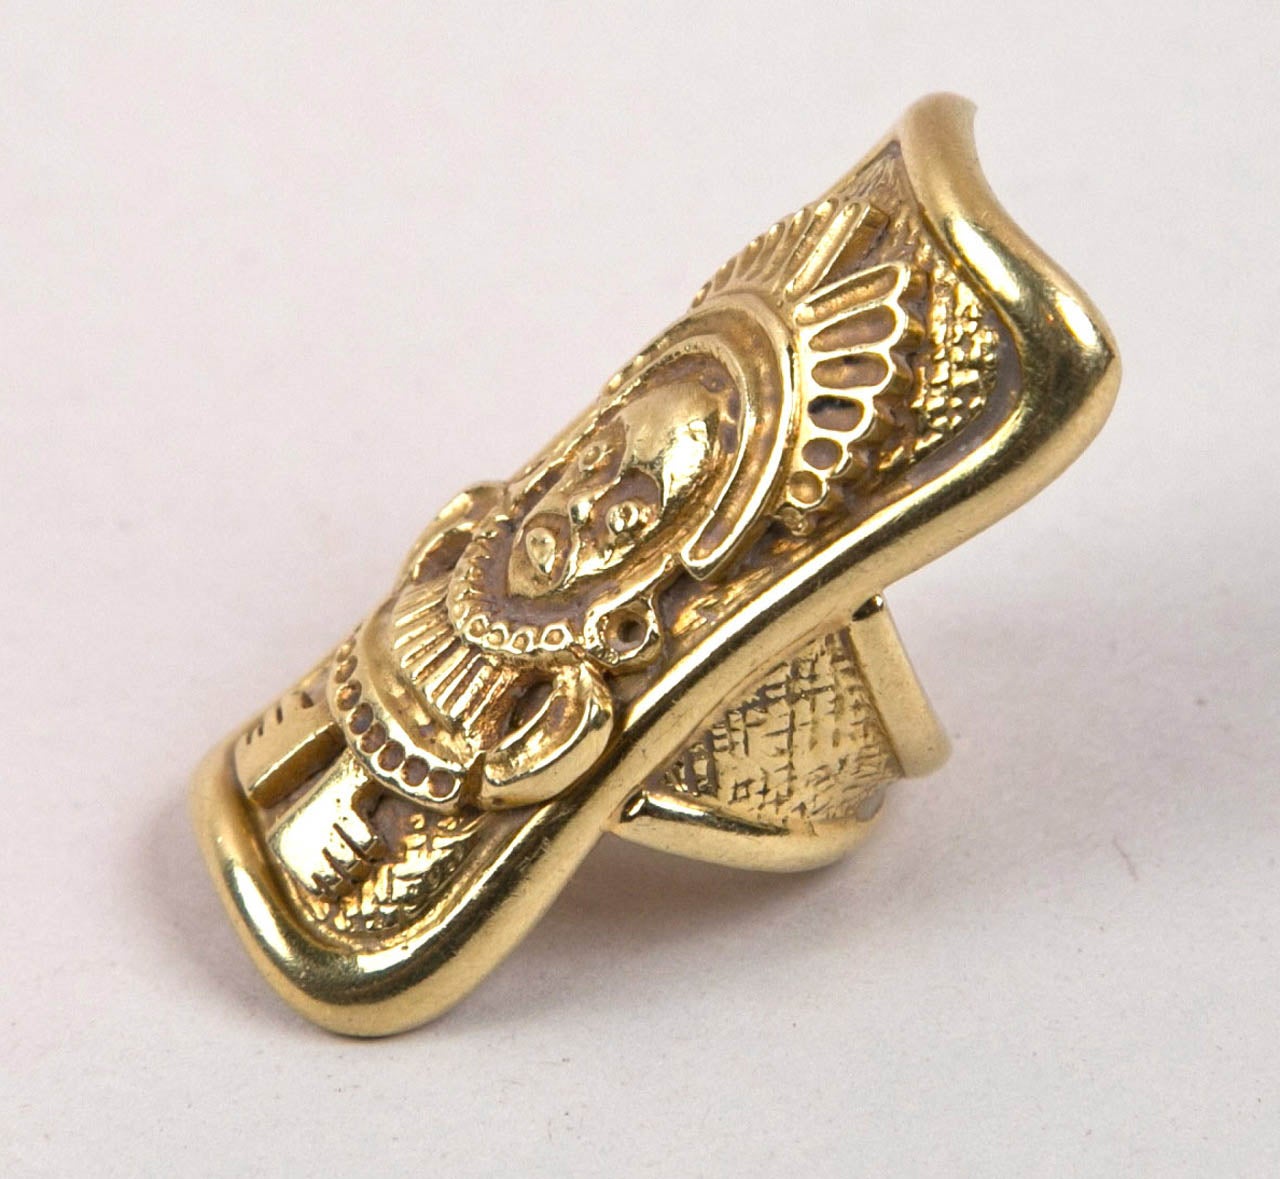 Handmade Gold Ancient Motif Ring, an exceptional piece
15.1dwt
Size 6.25